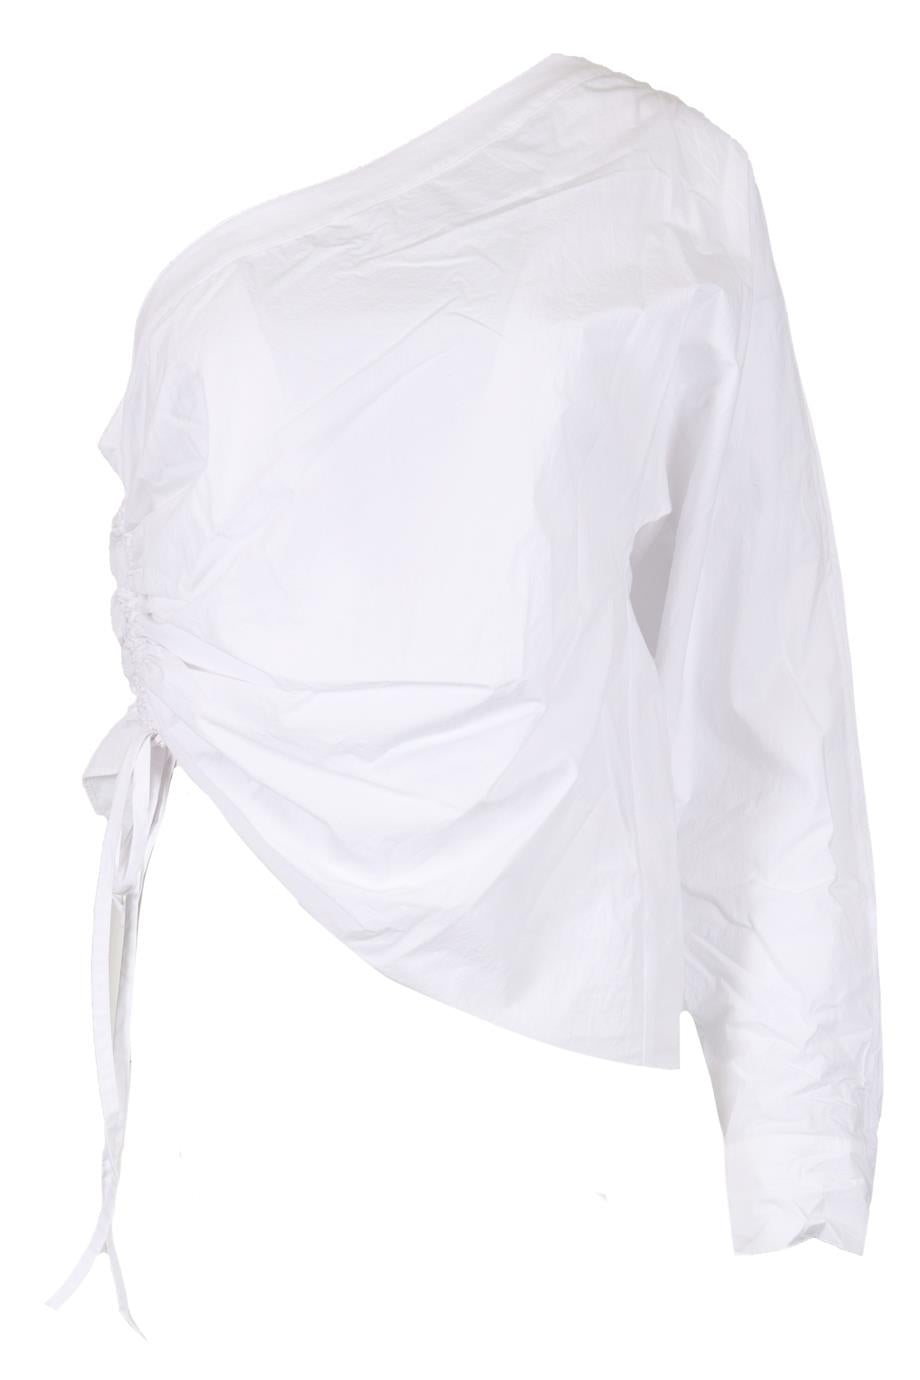 T BY ALEXANDER WANG RUCHED COTTON TOP US 4 UK 8